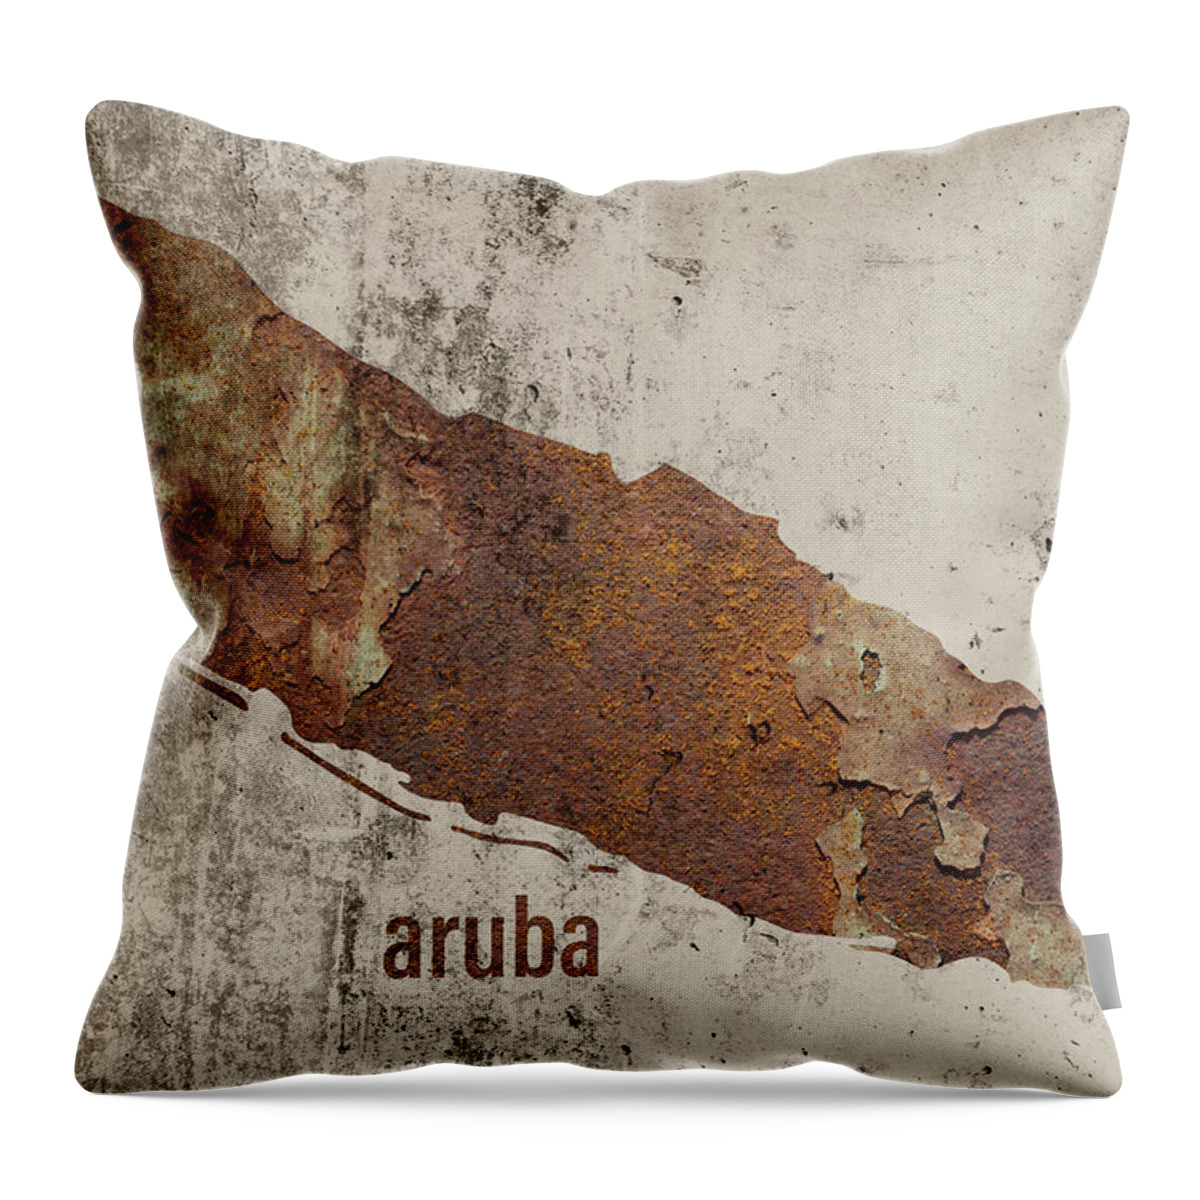 Aruba Throw Pillow featuring the mixed media Aruba Country Shape Map Rusty Cement Wall Art by Design Turnpike